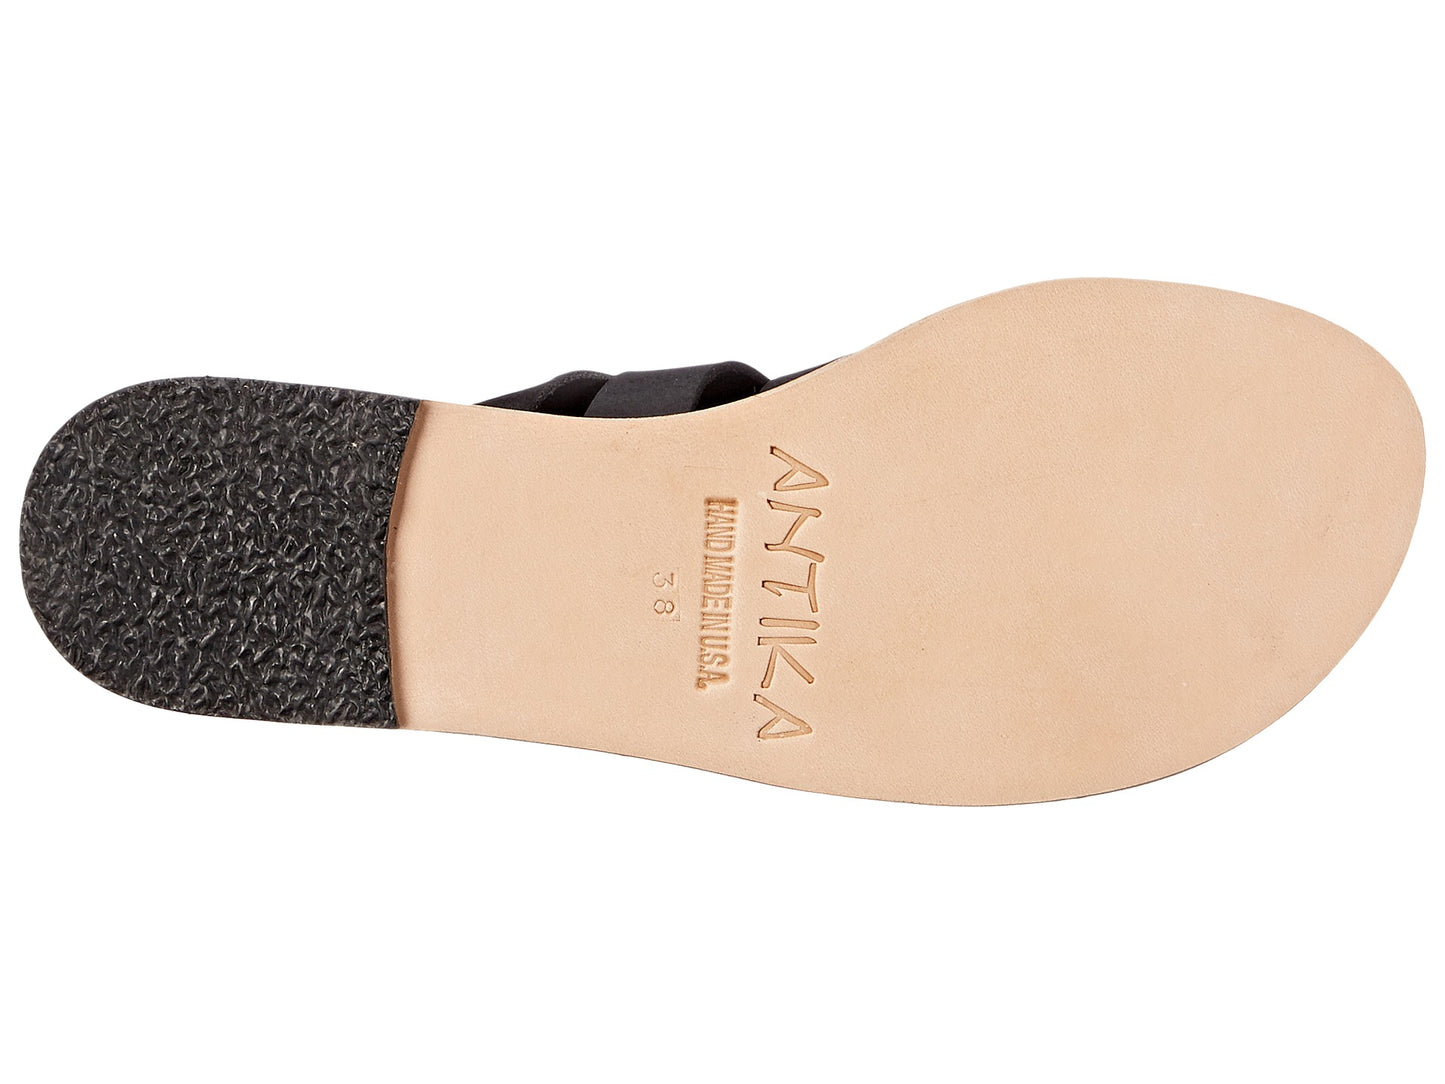 Santa Monica Blvd black, handmade leather sandals with anklet strap and buckle  - sole View